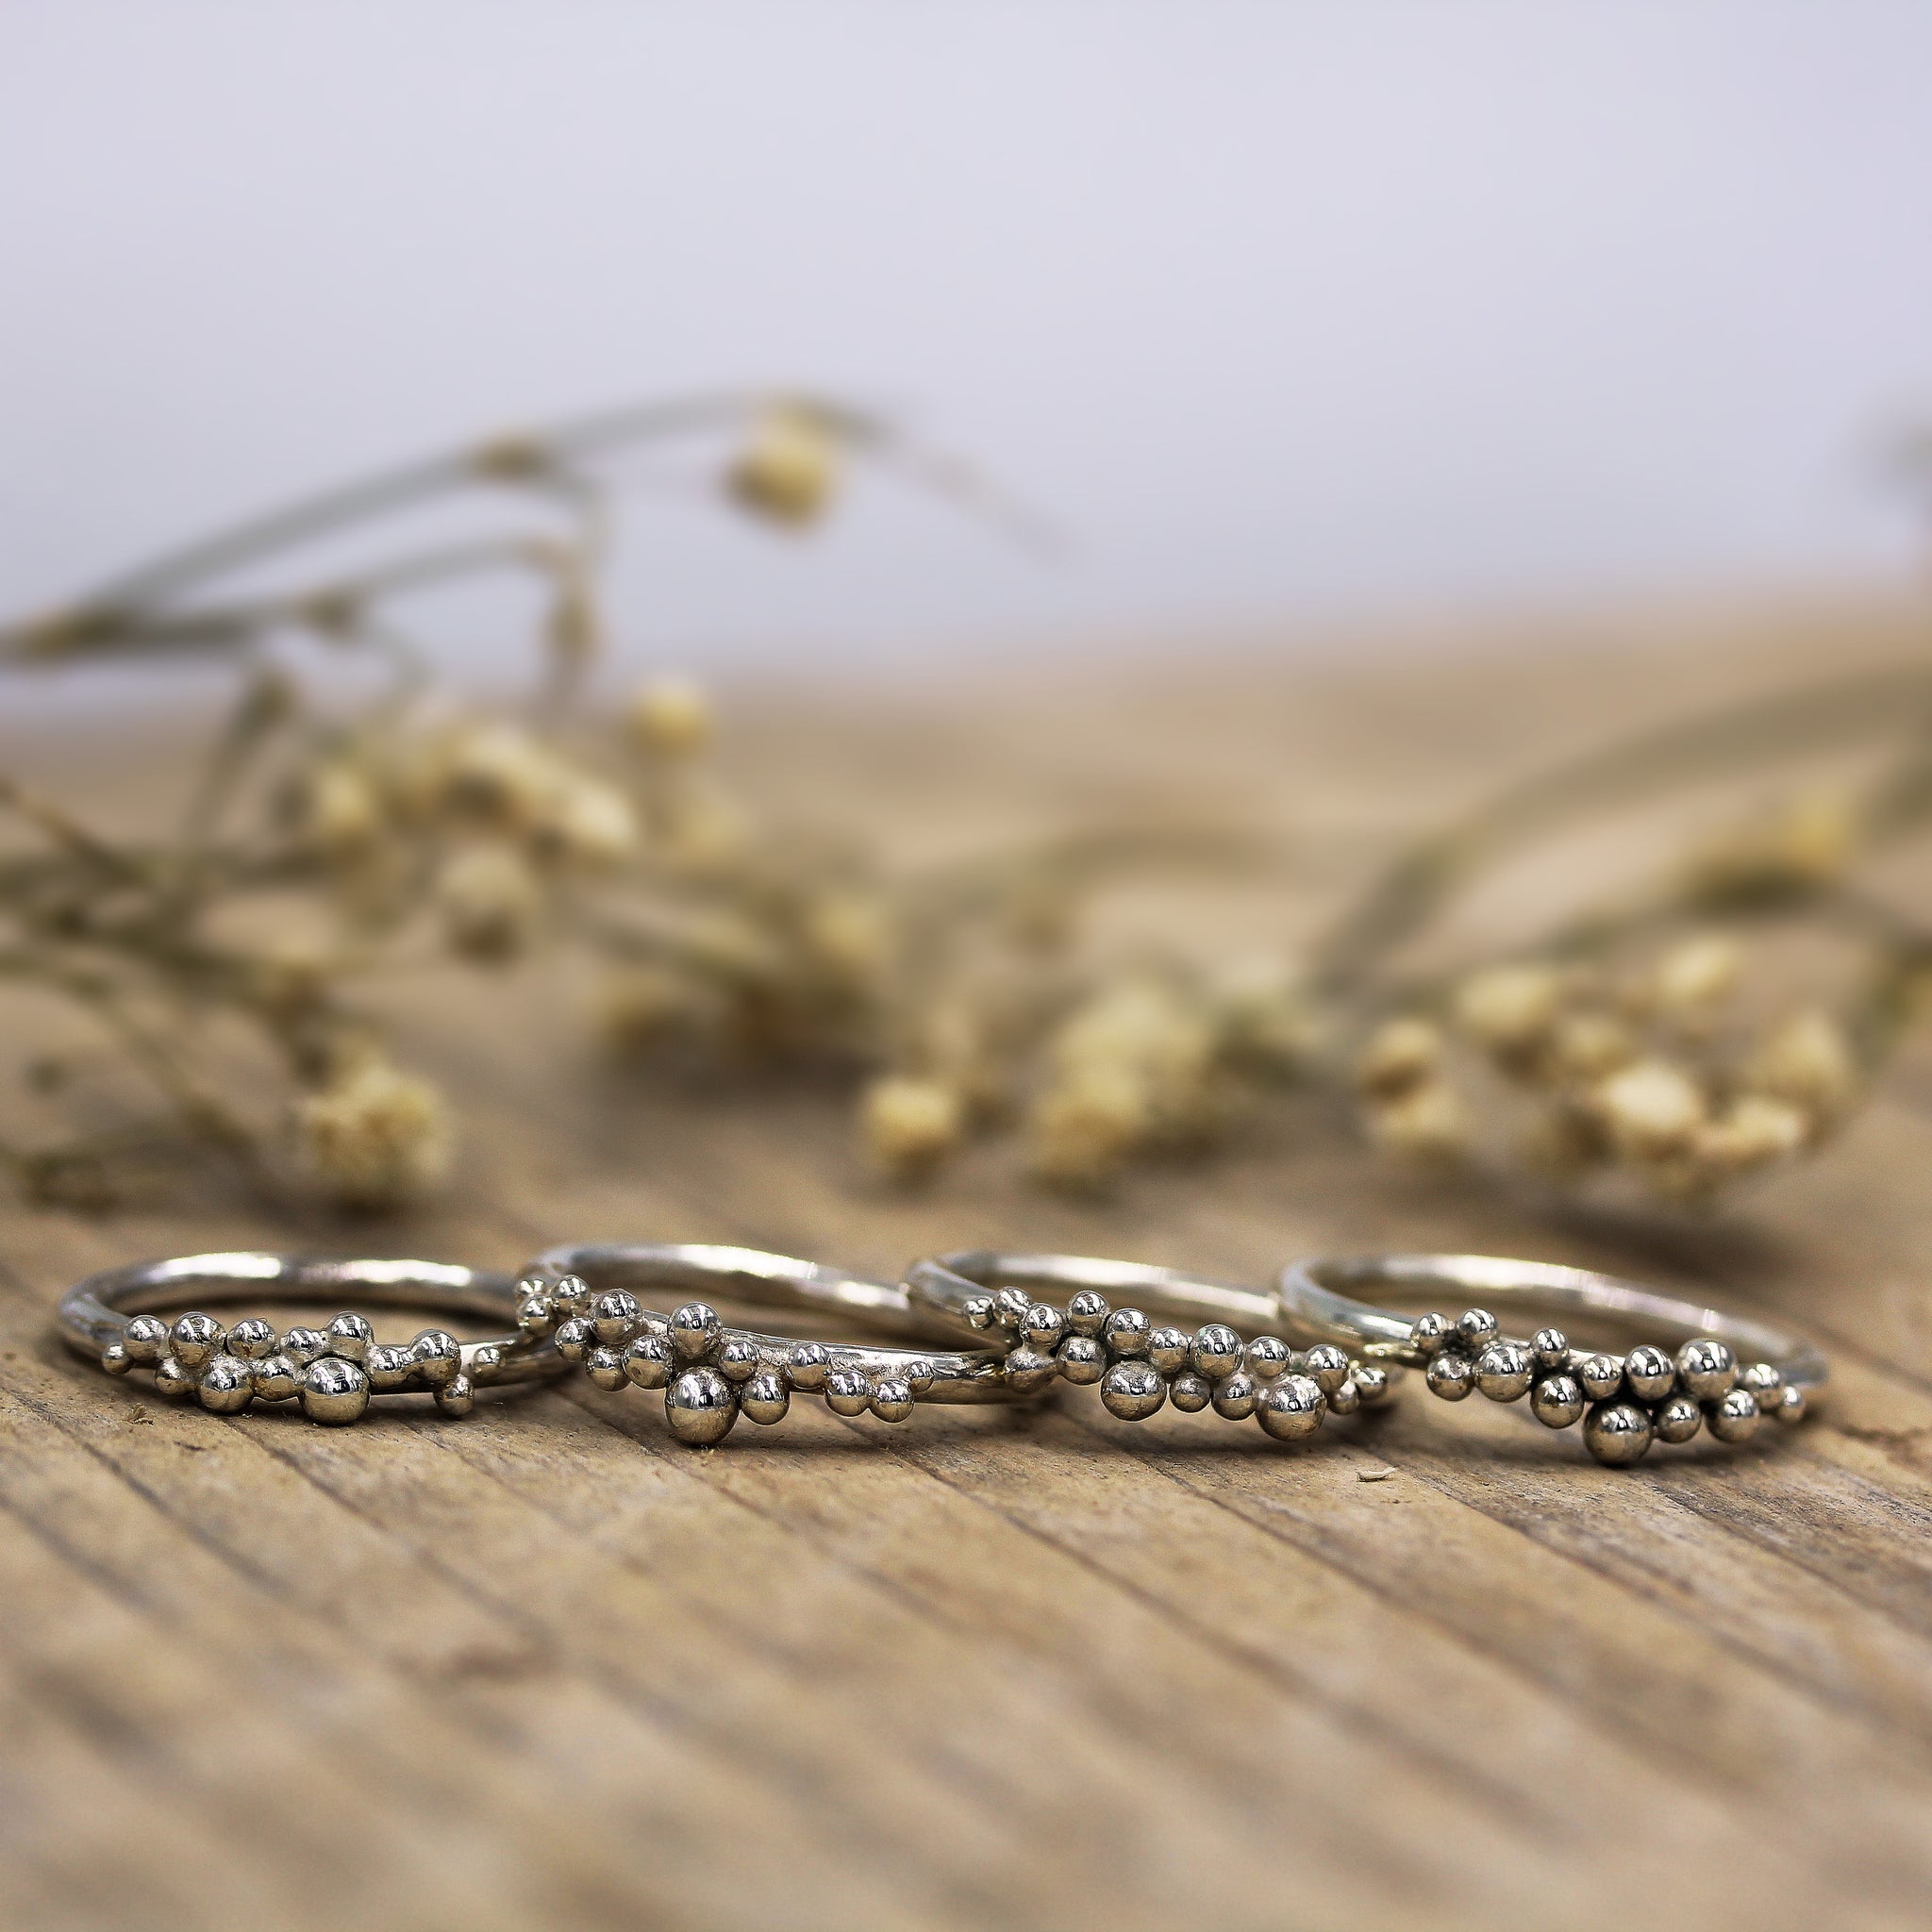 Grains of Sand ring, sea inspired handmade silver ring made in 100% recycled silver